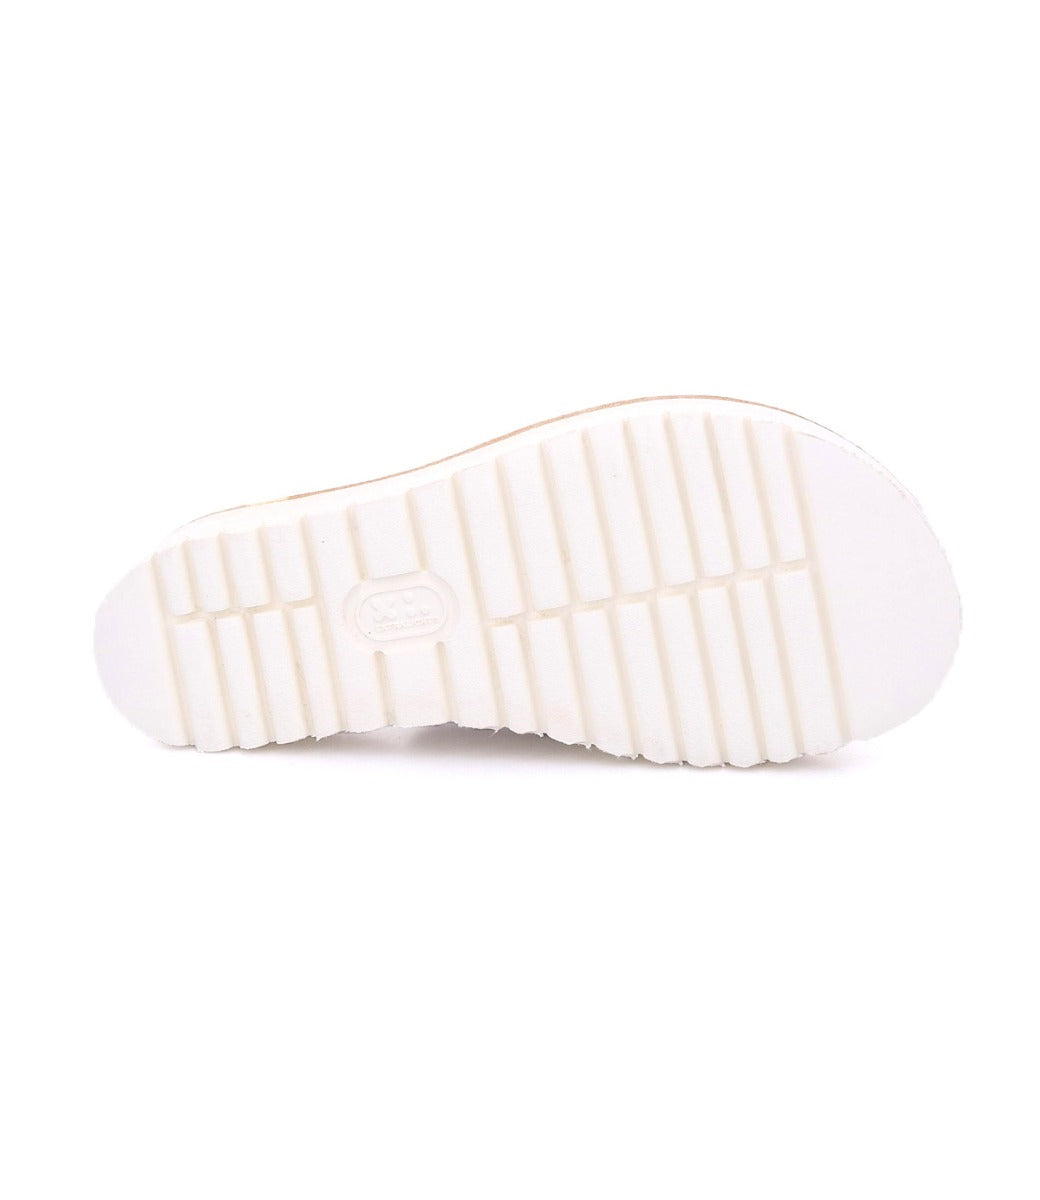 A Fairlee II shoe with white soles on a white background by Bed Stu.